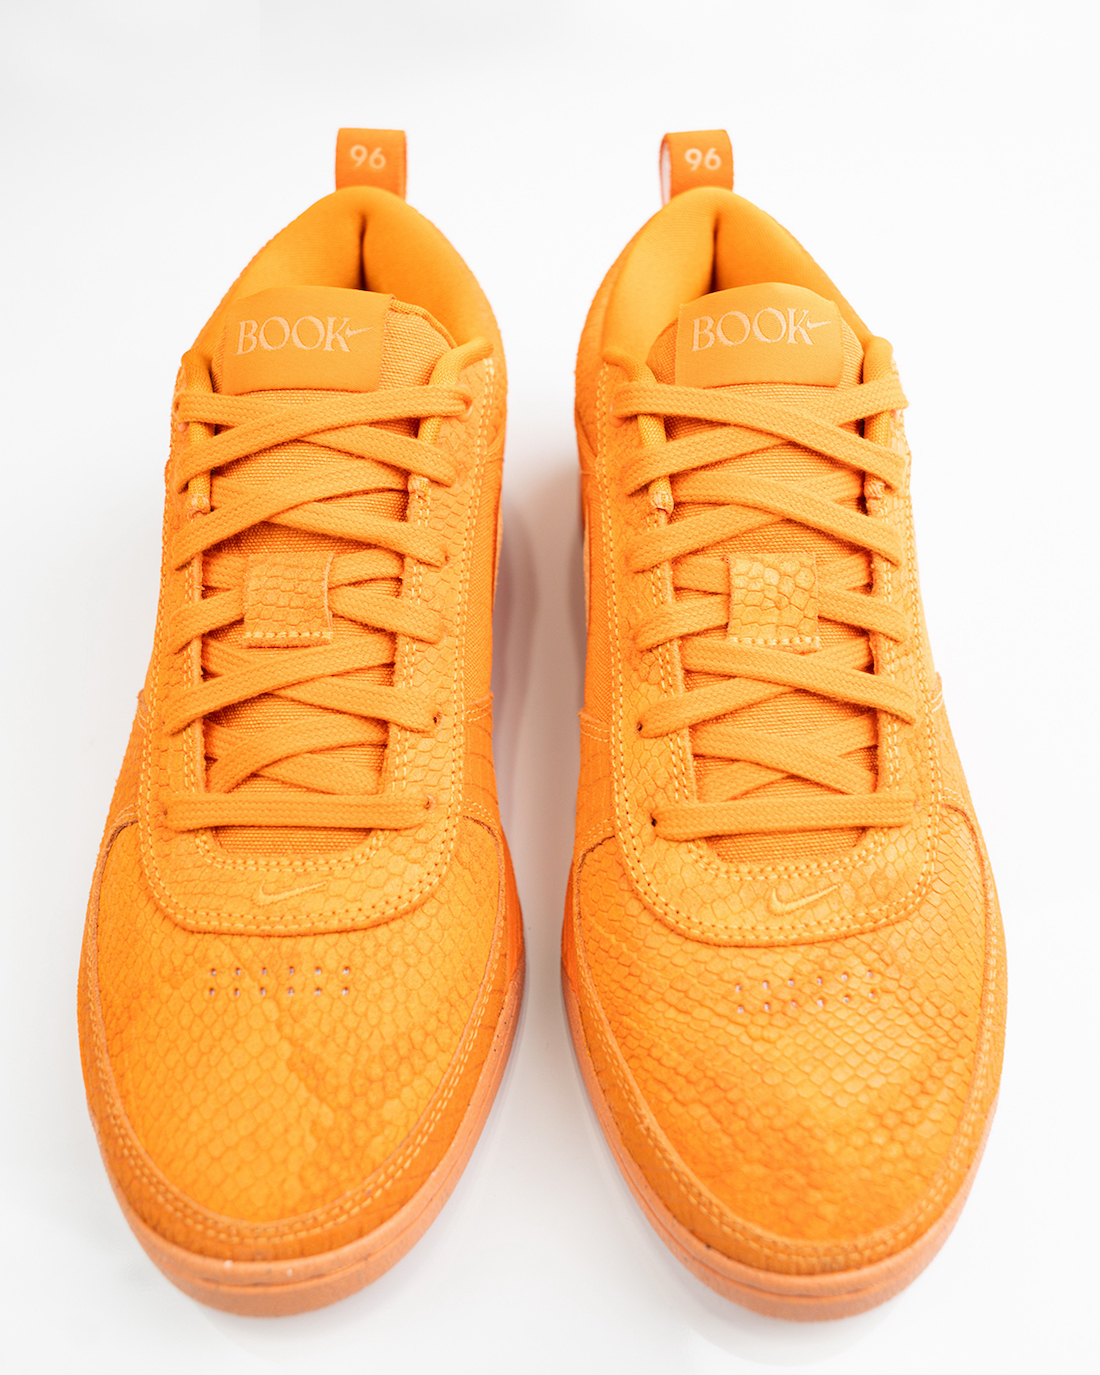 Devin Booker Nike D Book 1 Colorways + Release Dates | SBD